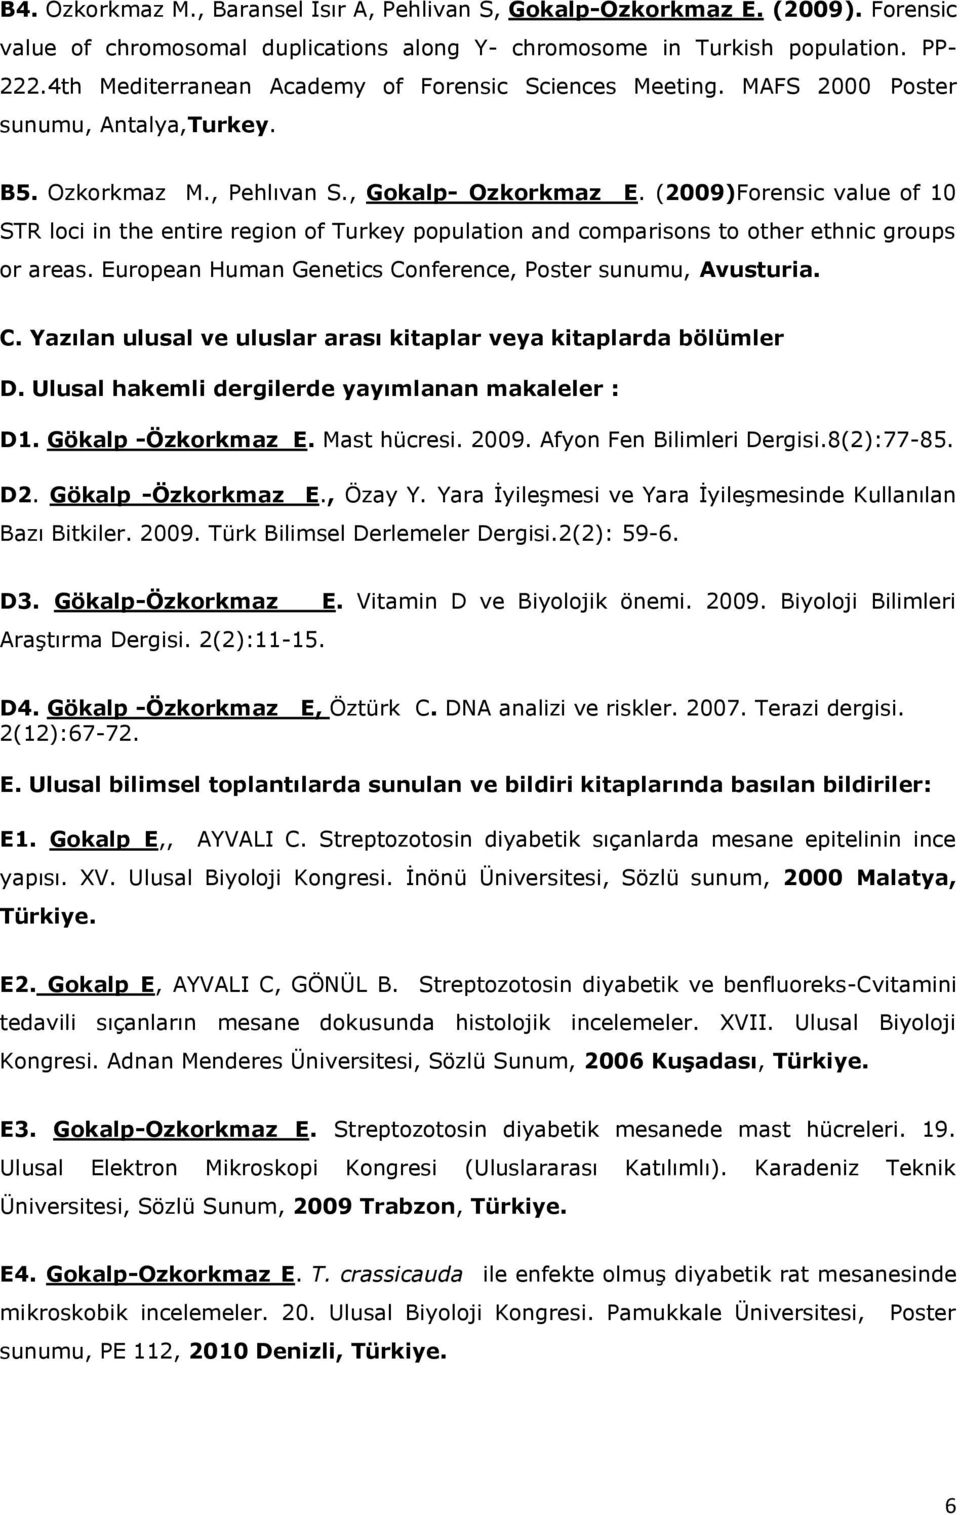 (2009)Forensic value of 10 STR loci in the entire region of Turkey population and comparisons to other ethnic groups or areas. European Human Genetics Co